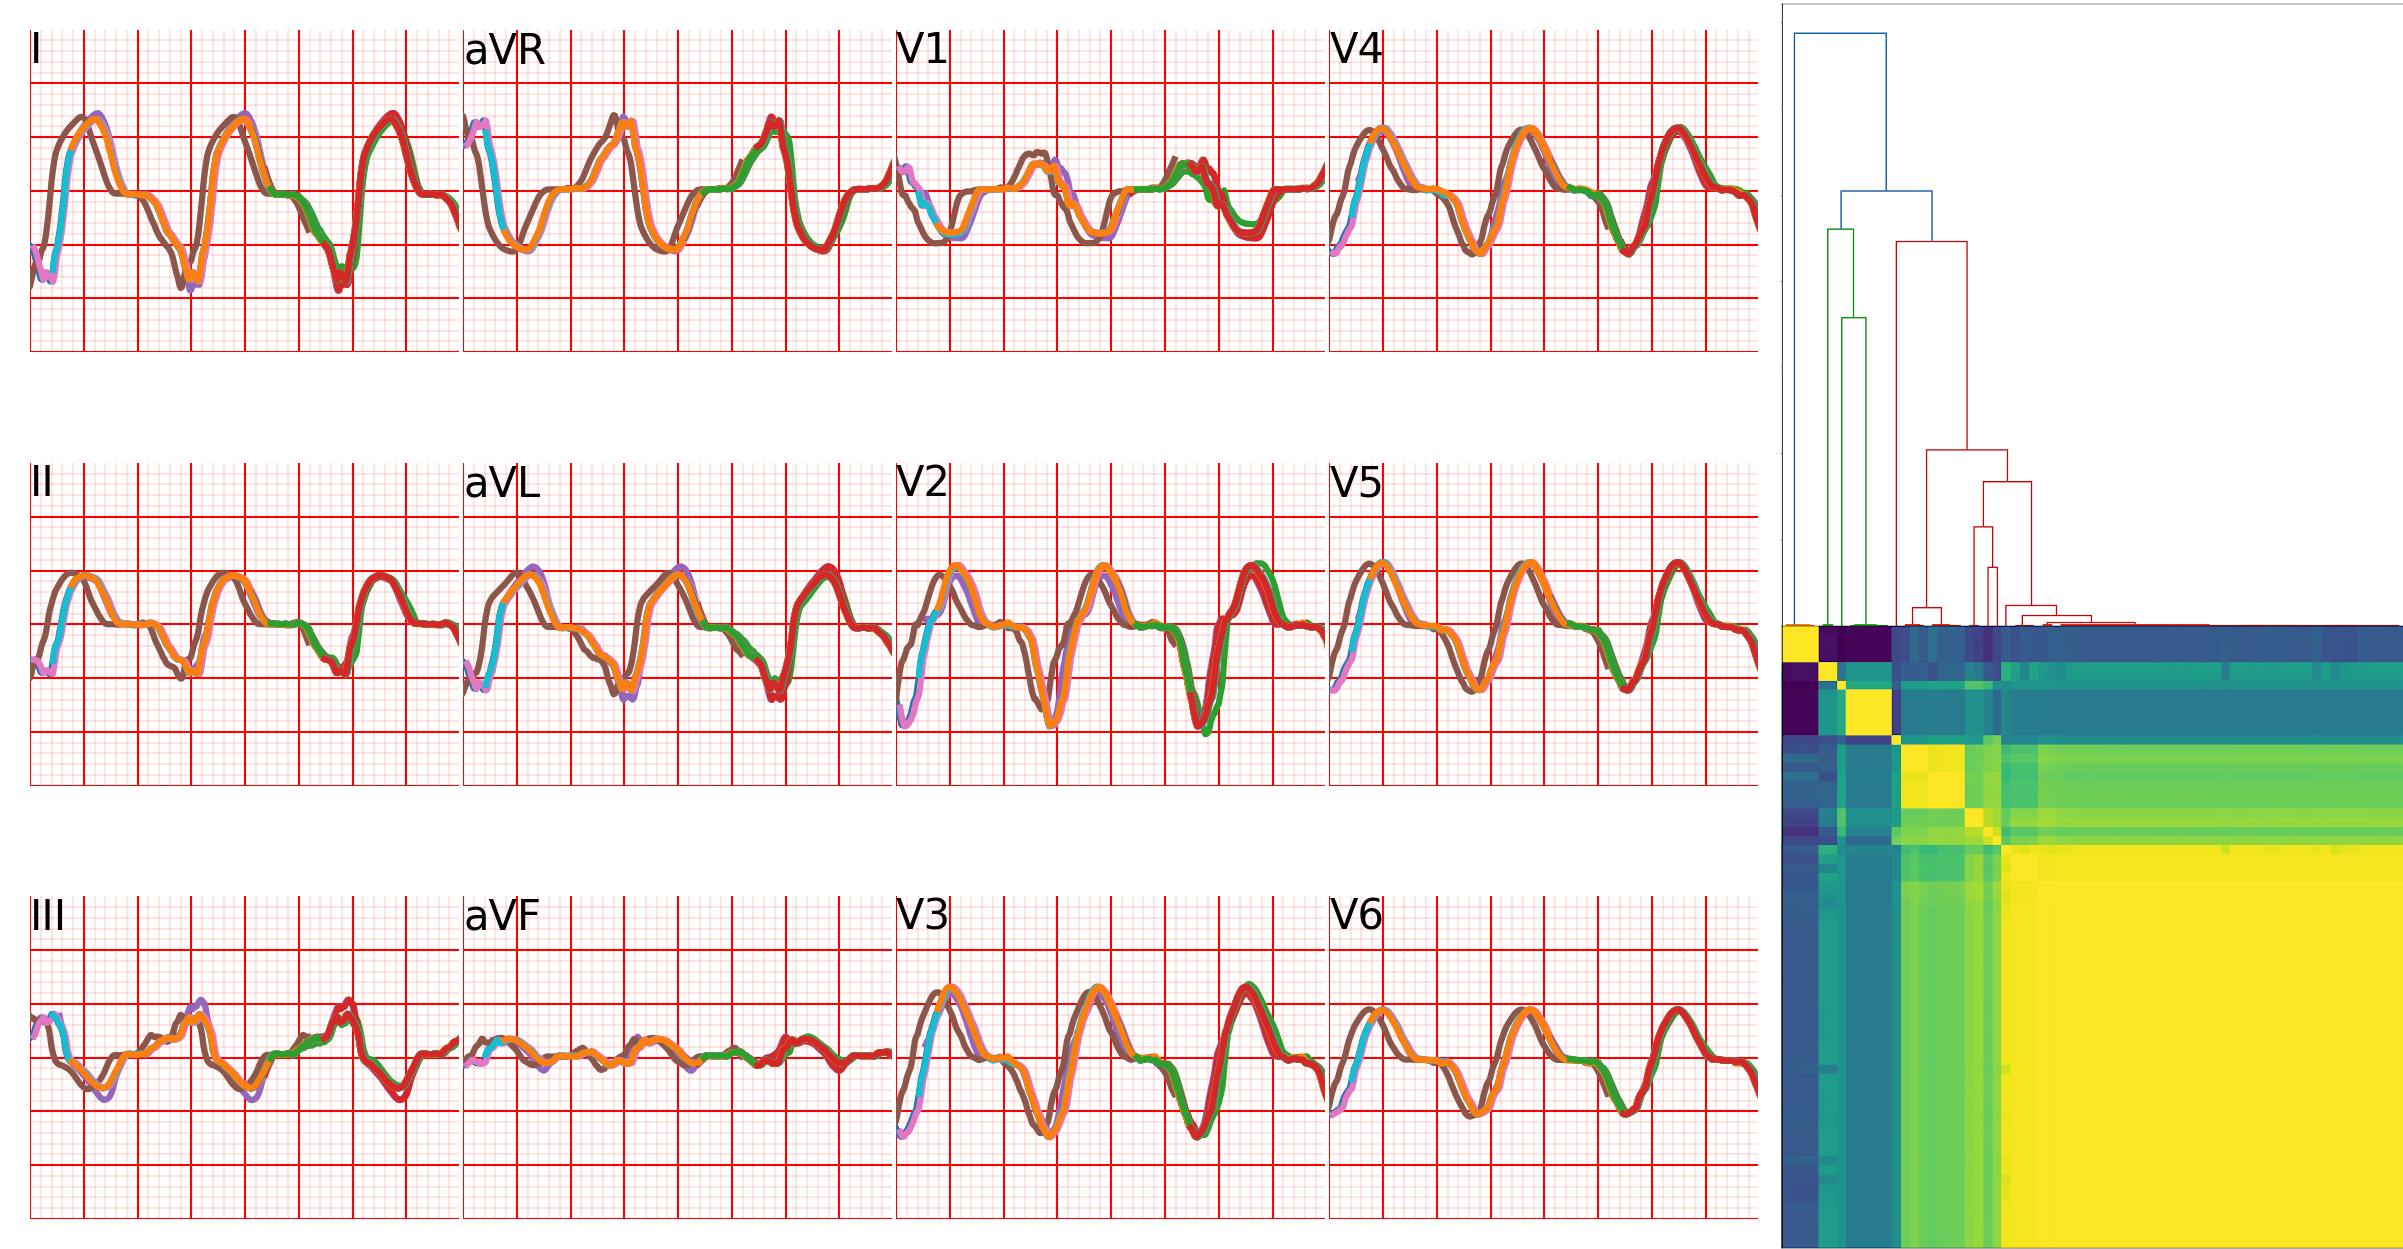 Figure 40: Clustering simulations outputs. Left part: superimposition of different simulated ECGs that have a circular cross-correlation above 0.95, forming a single cluster. Right part: distance matrix between all simulated ECGs for a patient, with the corresponding dendrogram.